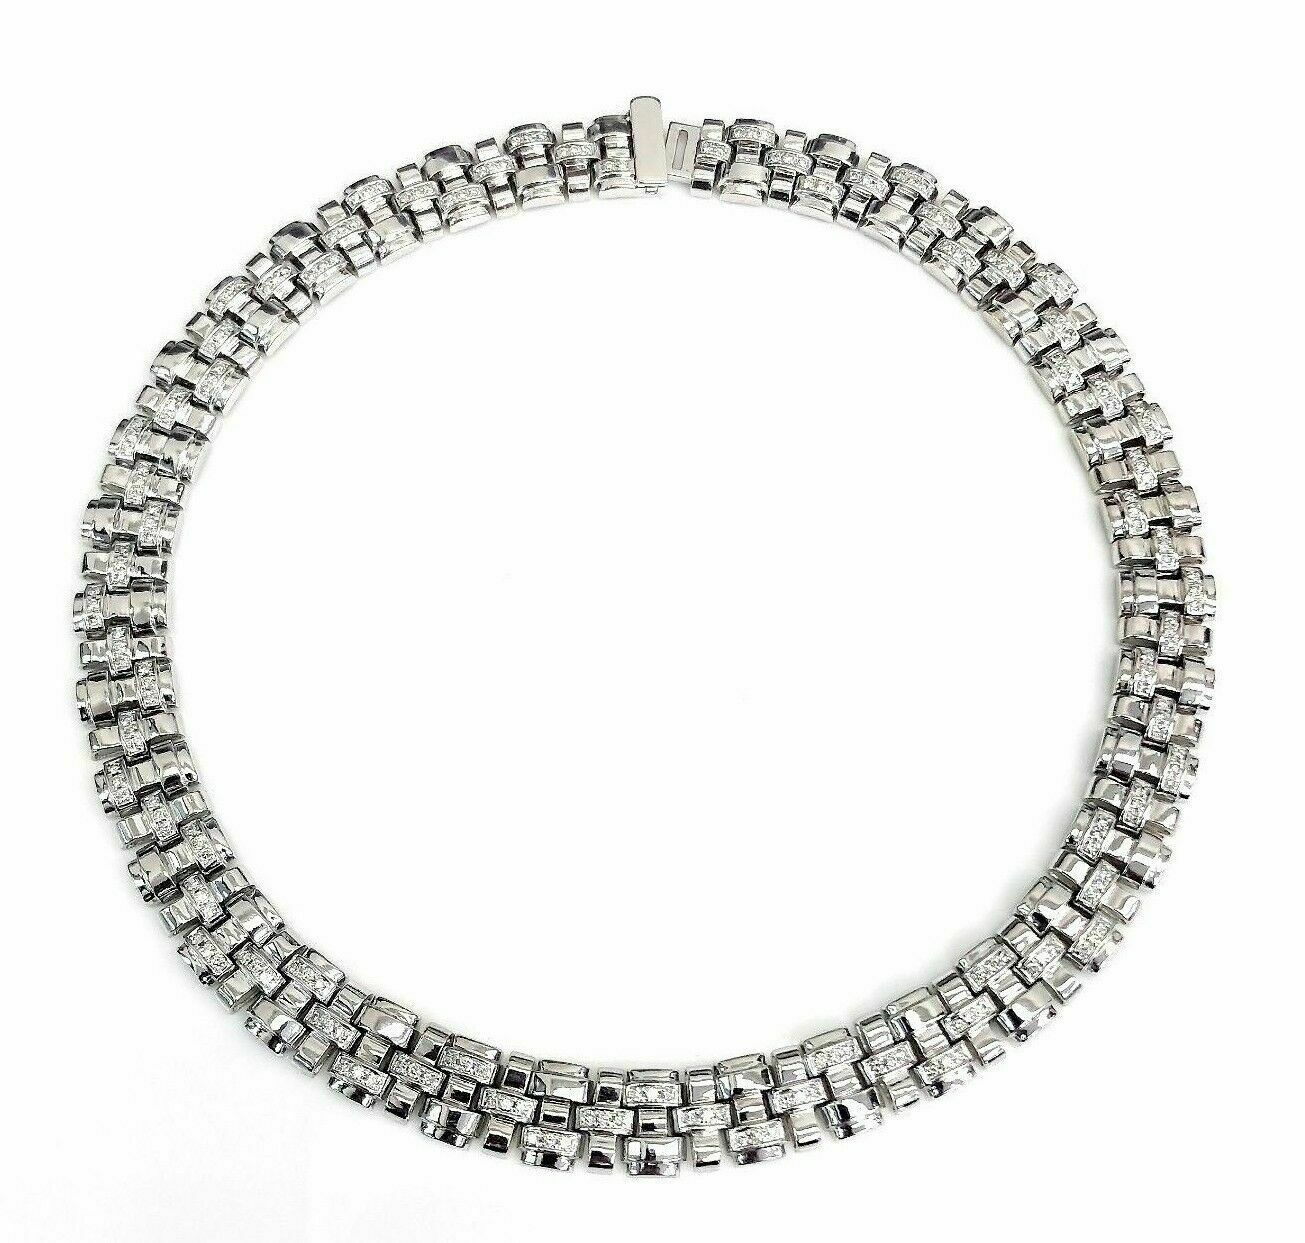 Custom Made 2.55 Carats Diamond Dinner Necklace Chain14K White Gold